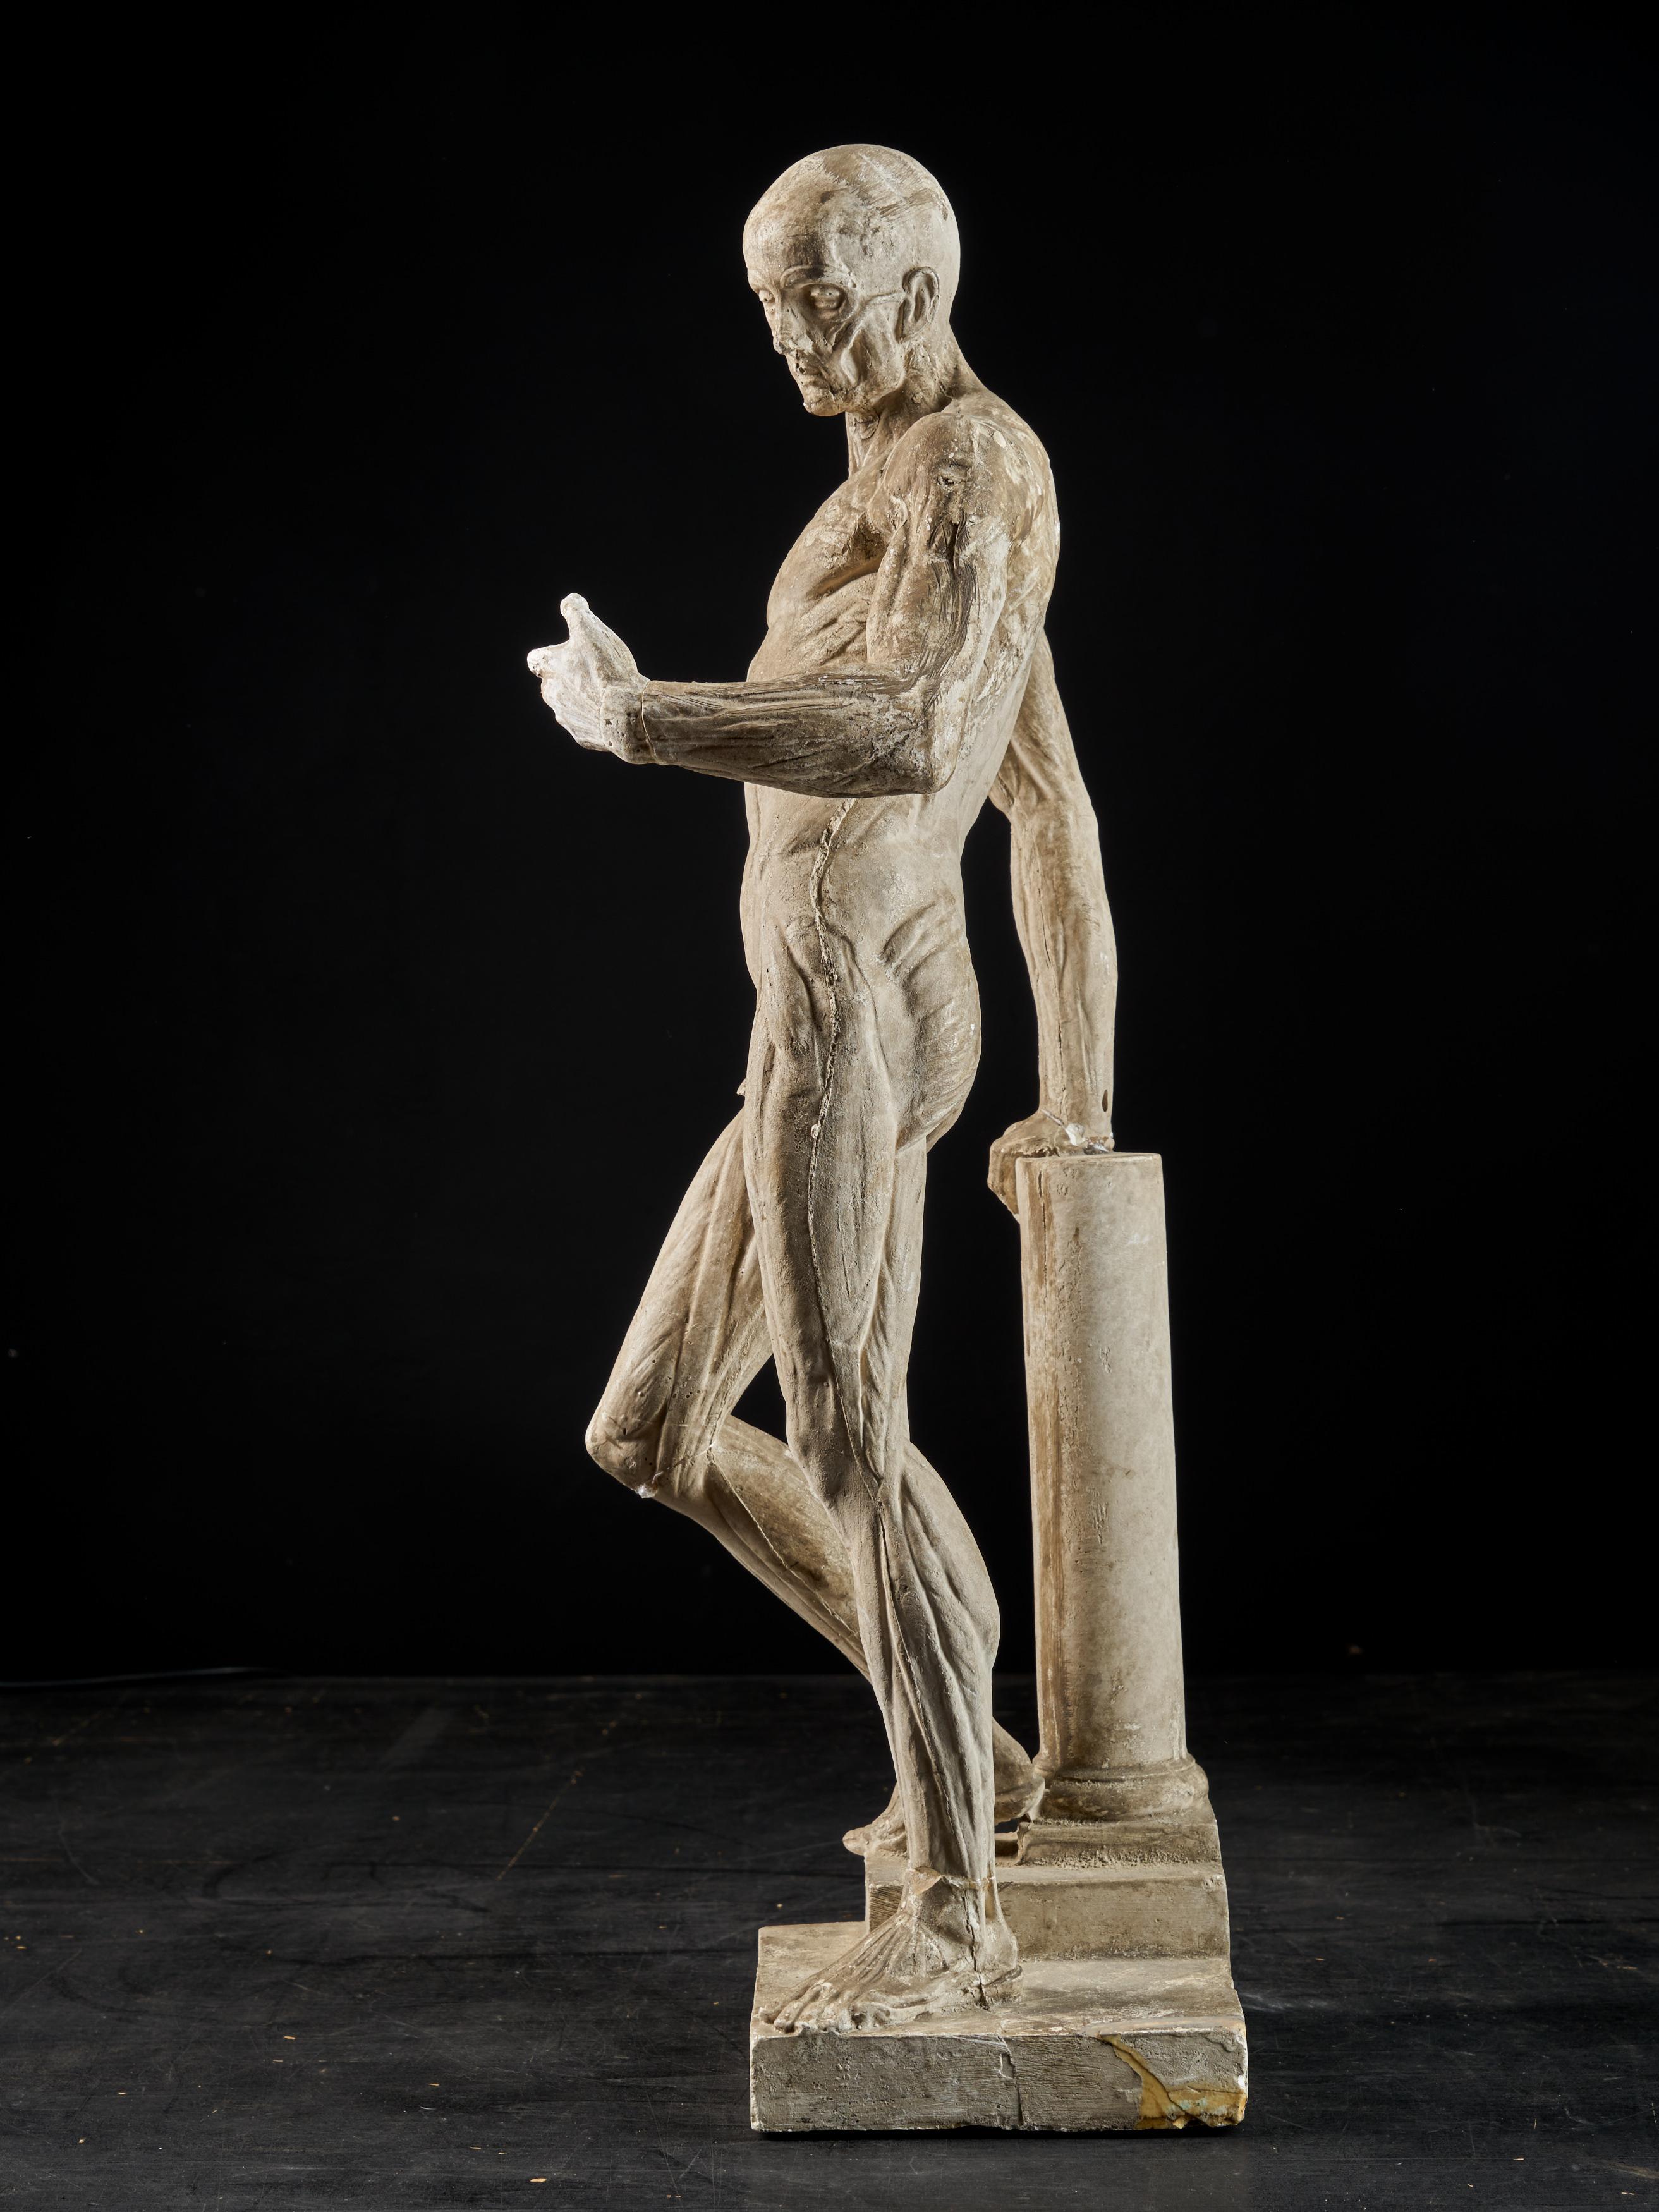 Carved 19th Century, Italian School, Two Anatomical Flayed Figures in Plaster